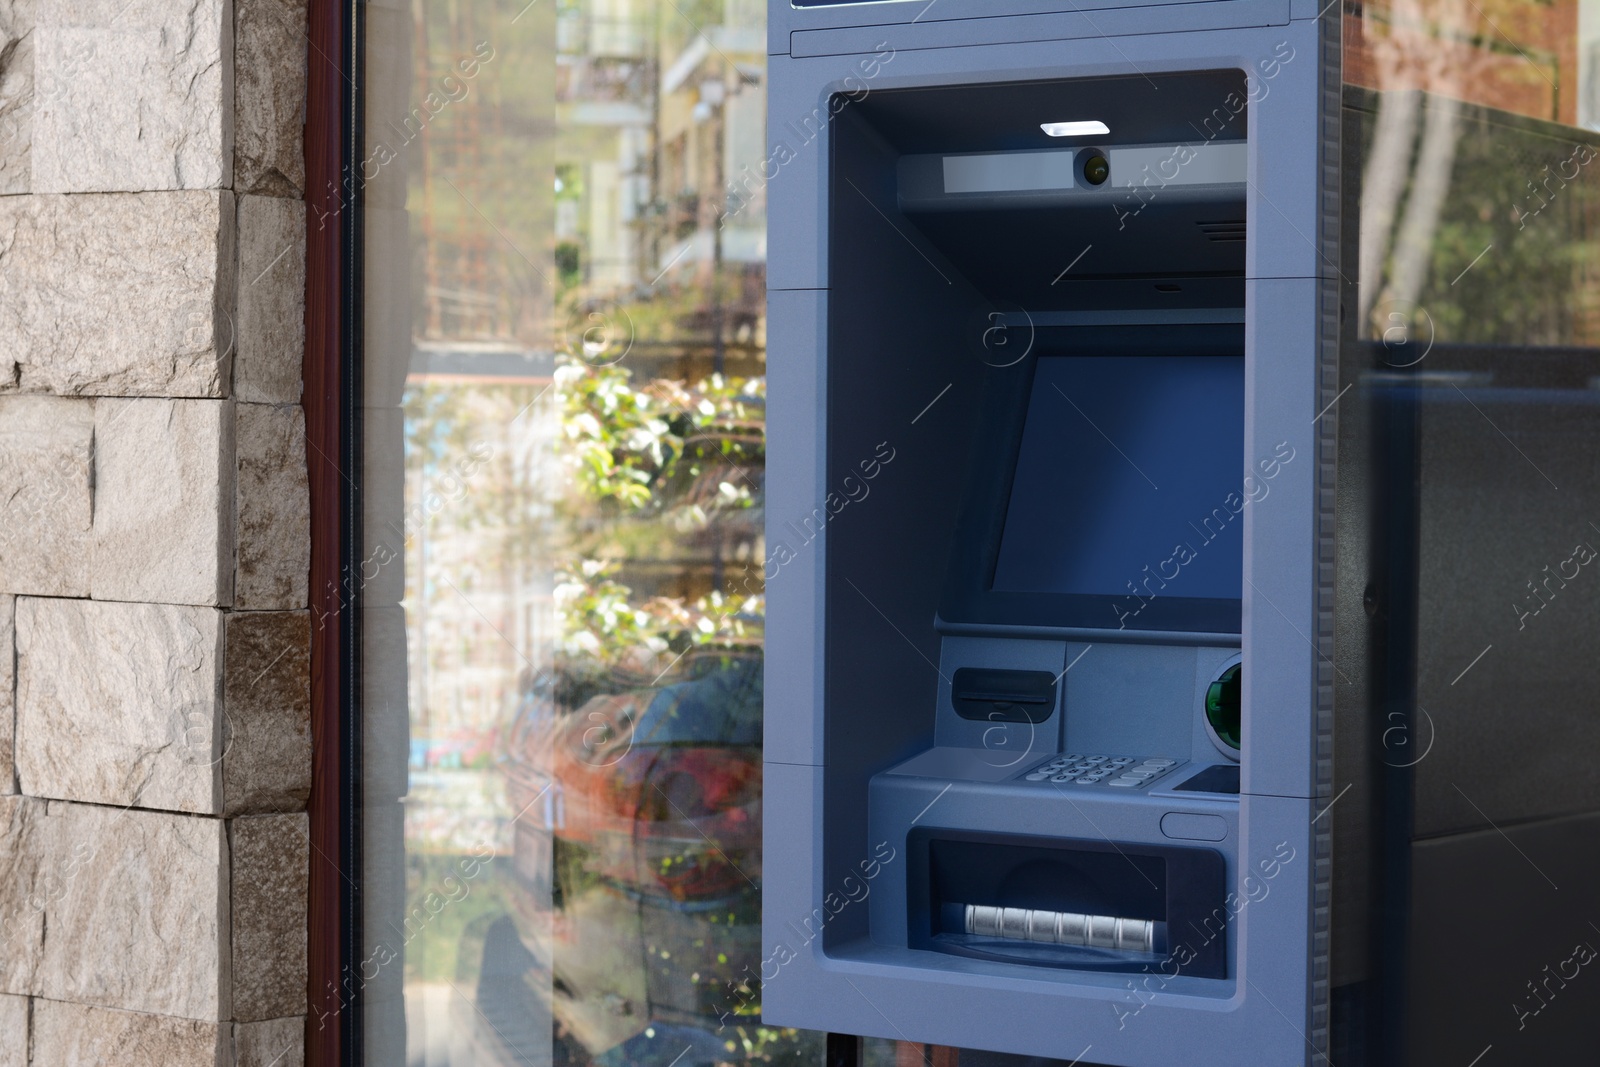 Photo of Automated teller machine outdoors on sunny day. Space for text